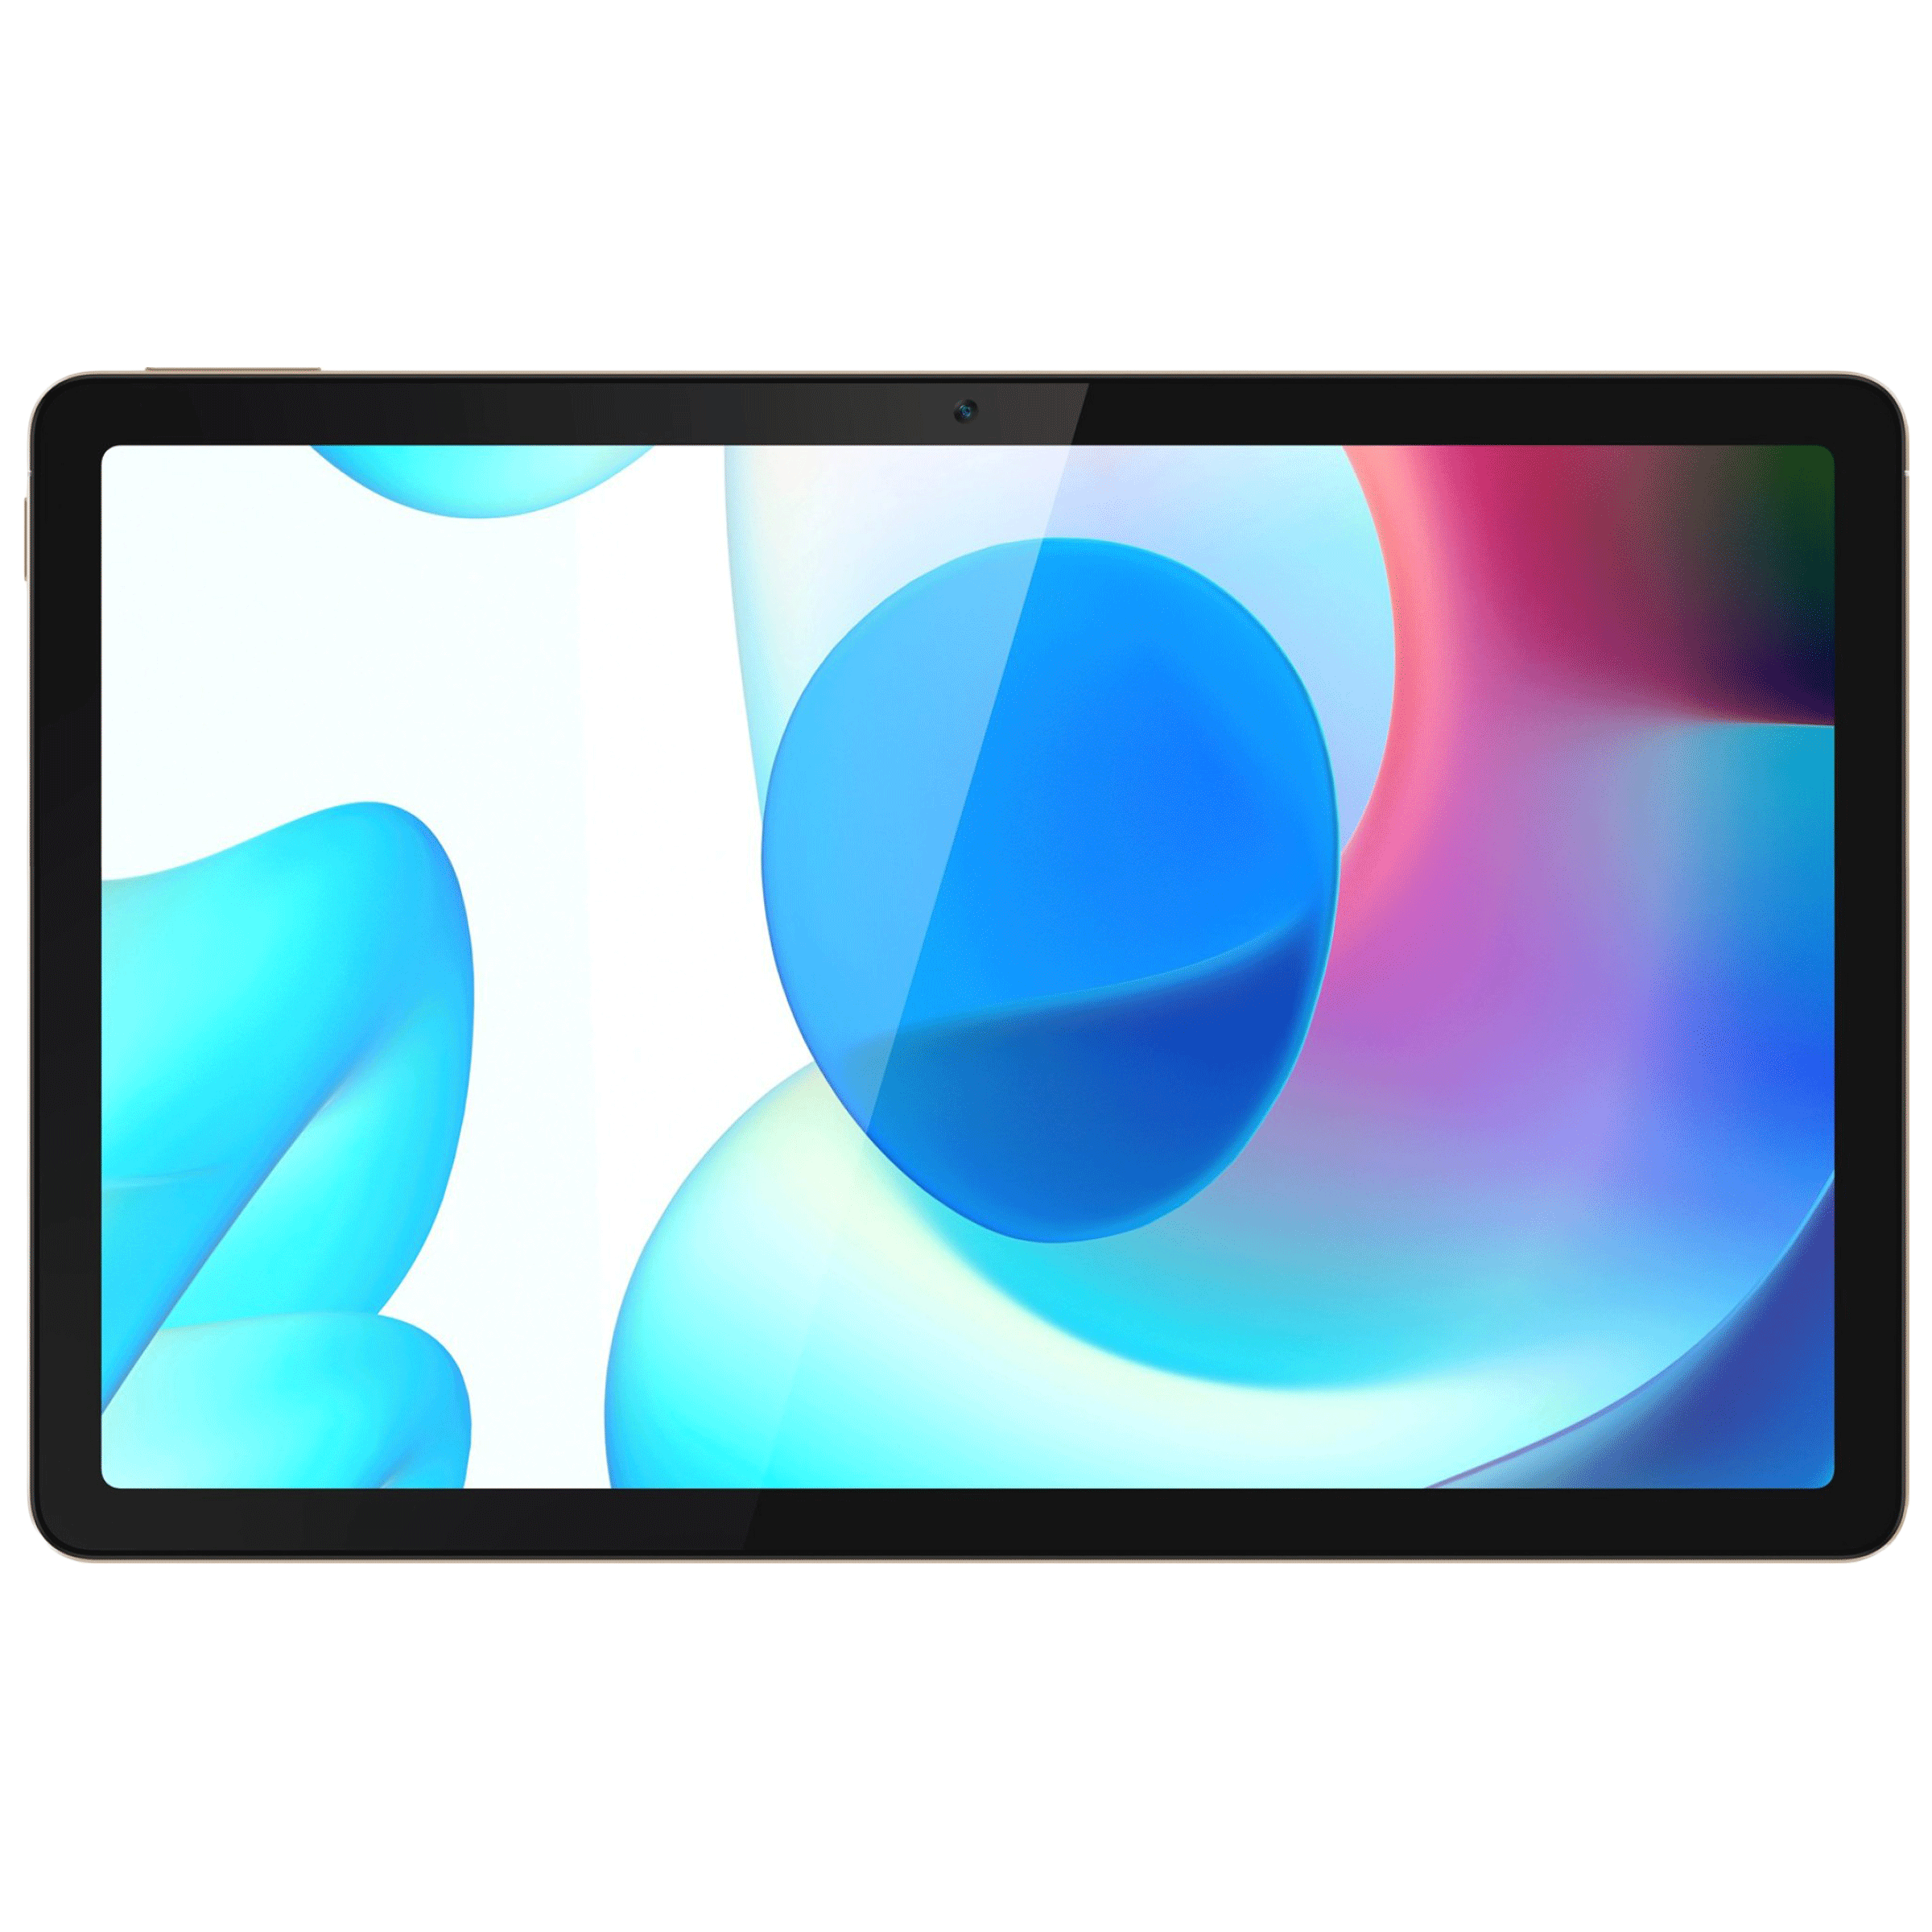 realme Pad Wi-Fi+4G Android Tablet (10.4 Inch, 6GB RAM, 128GB ROM, Gold)